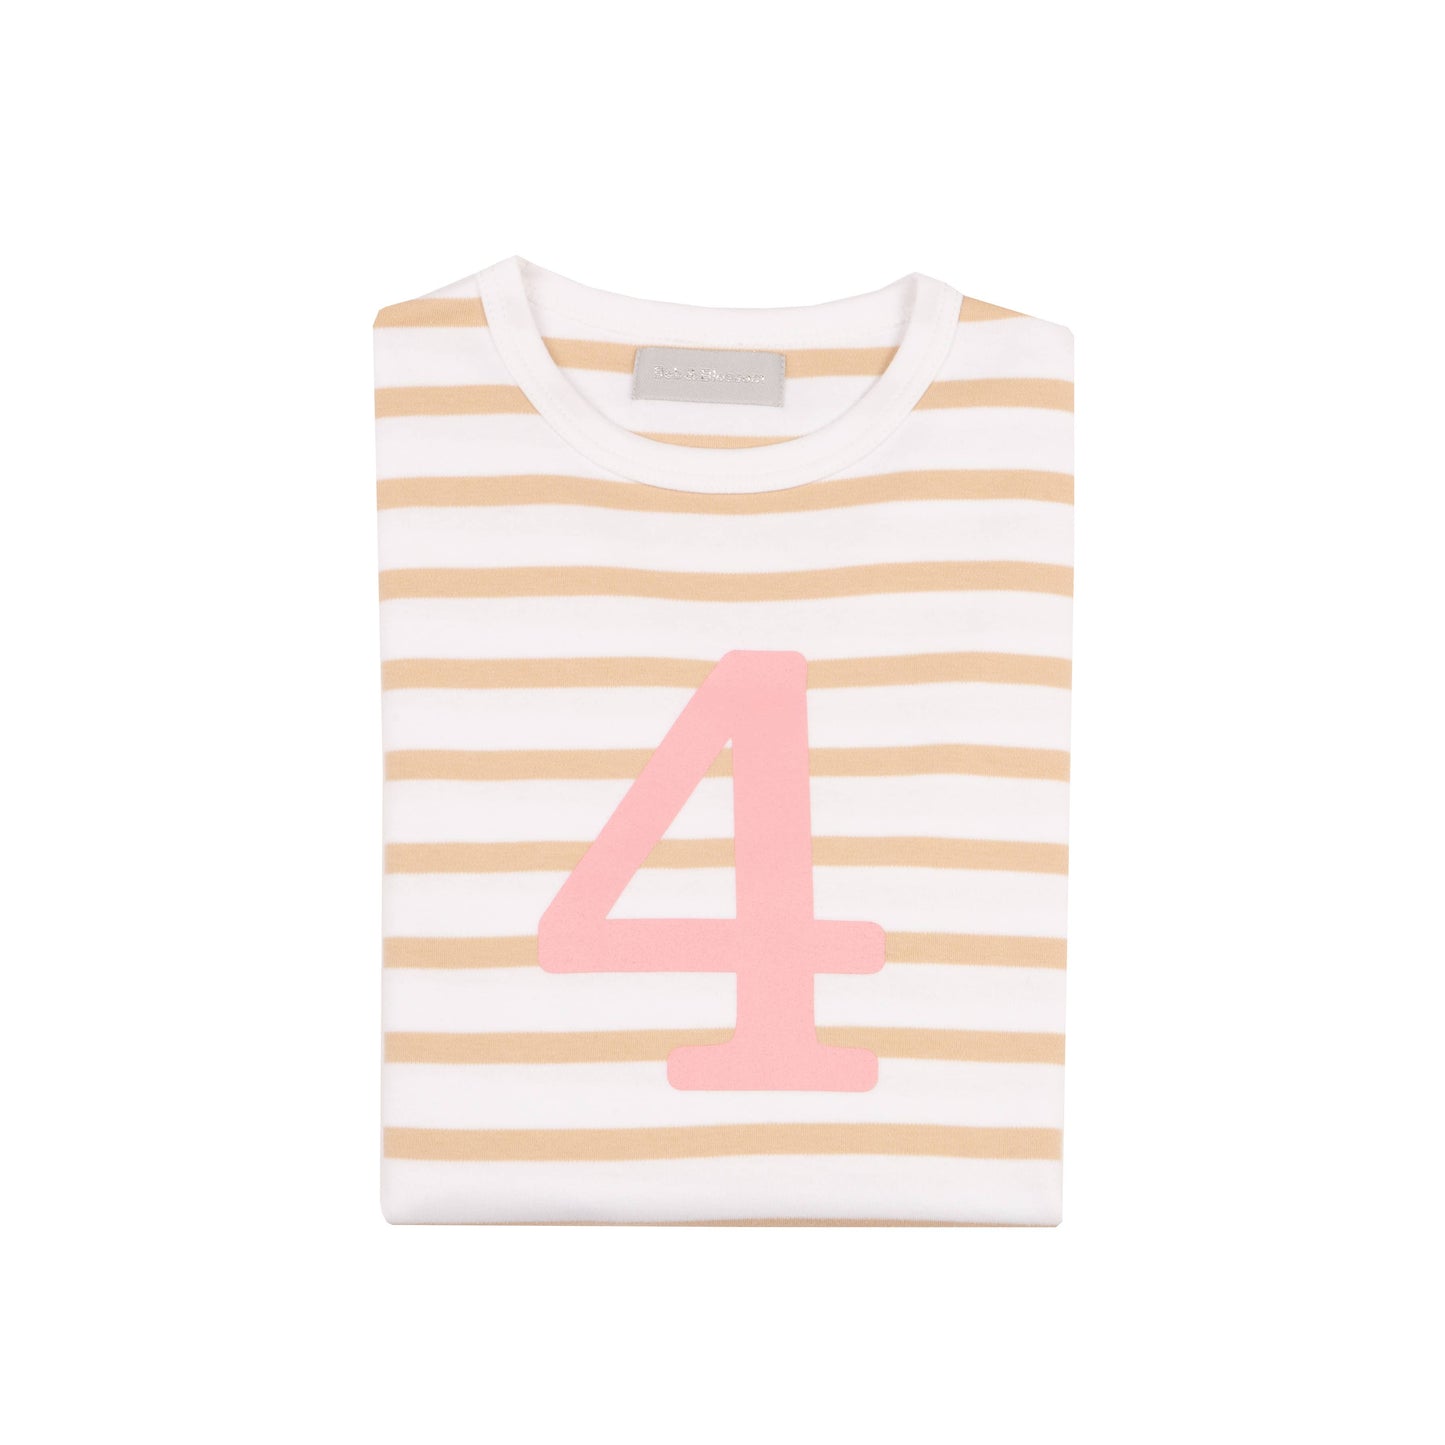 Biscuit & White Striped 4 (Pink) Shirt